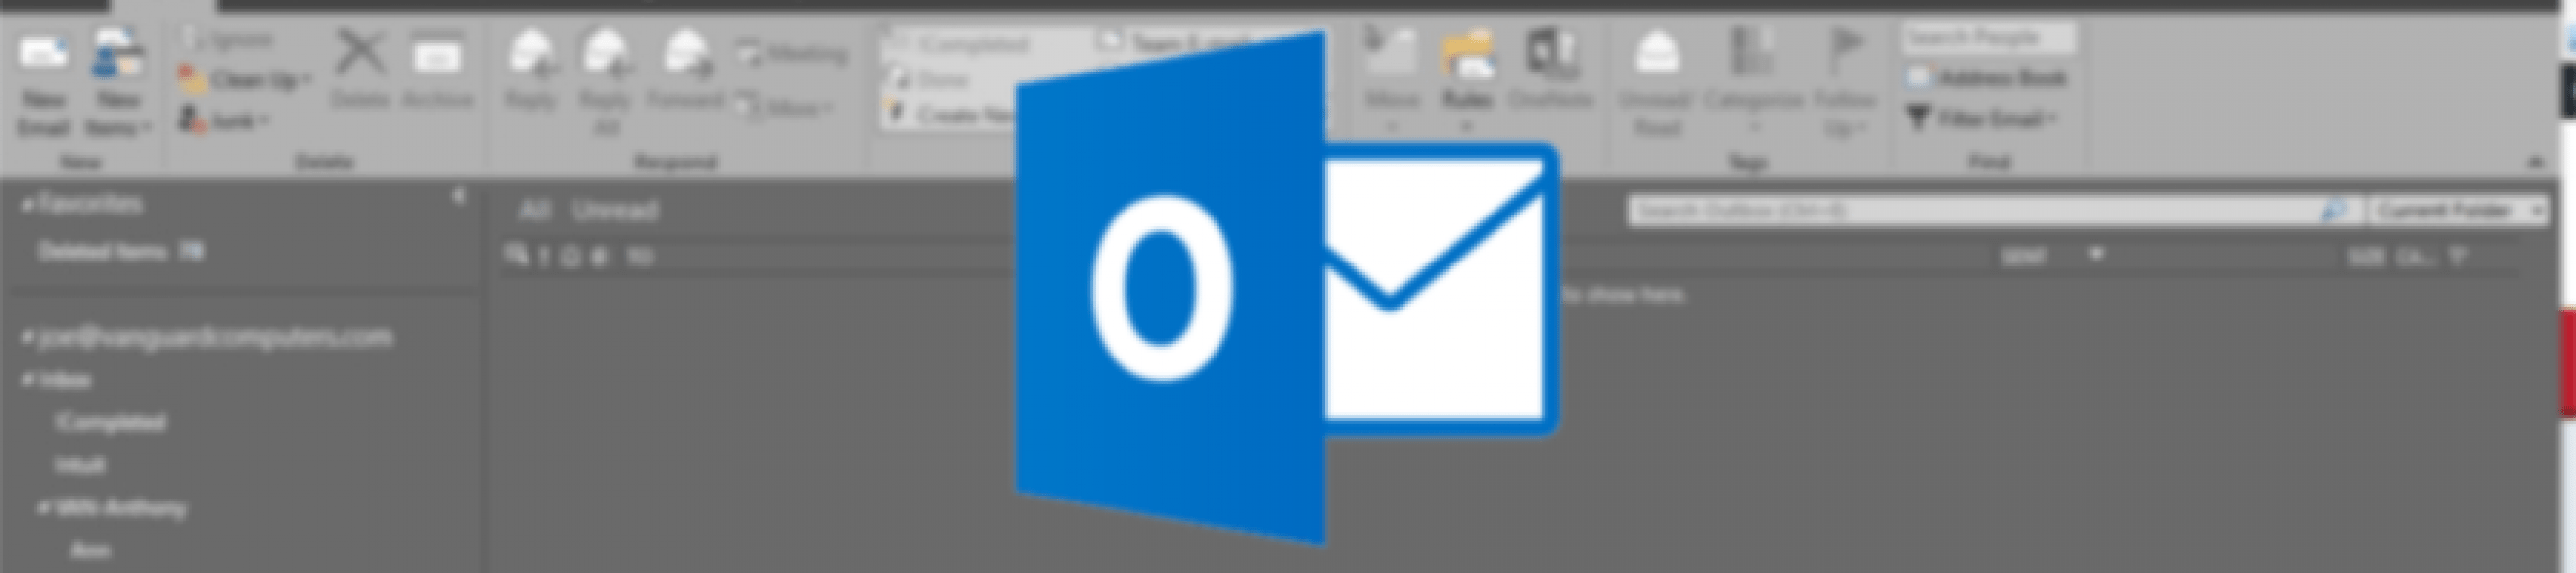 how to add signature in outlook 2016 for plain text emails